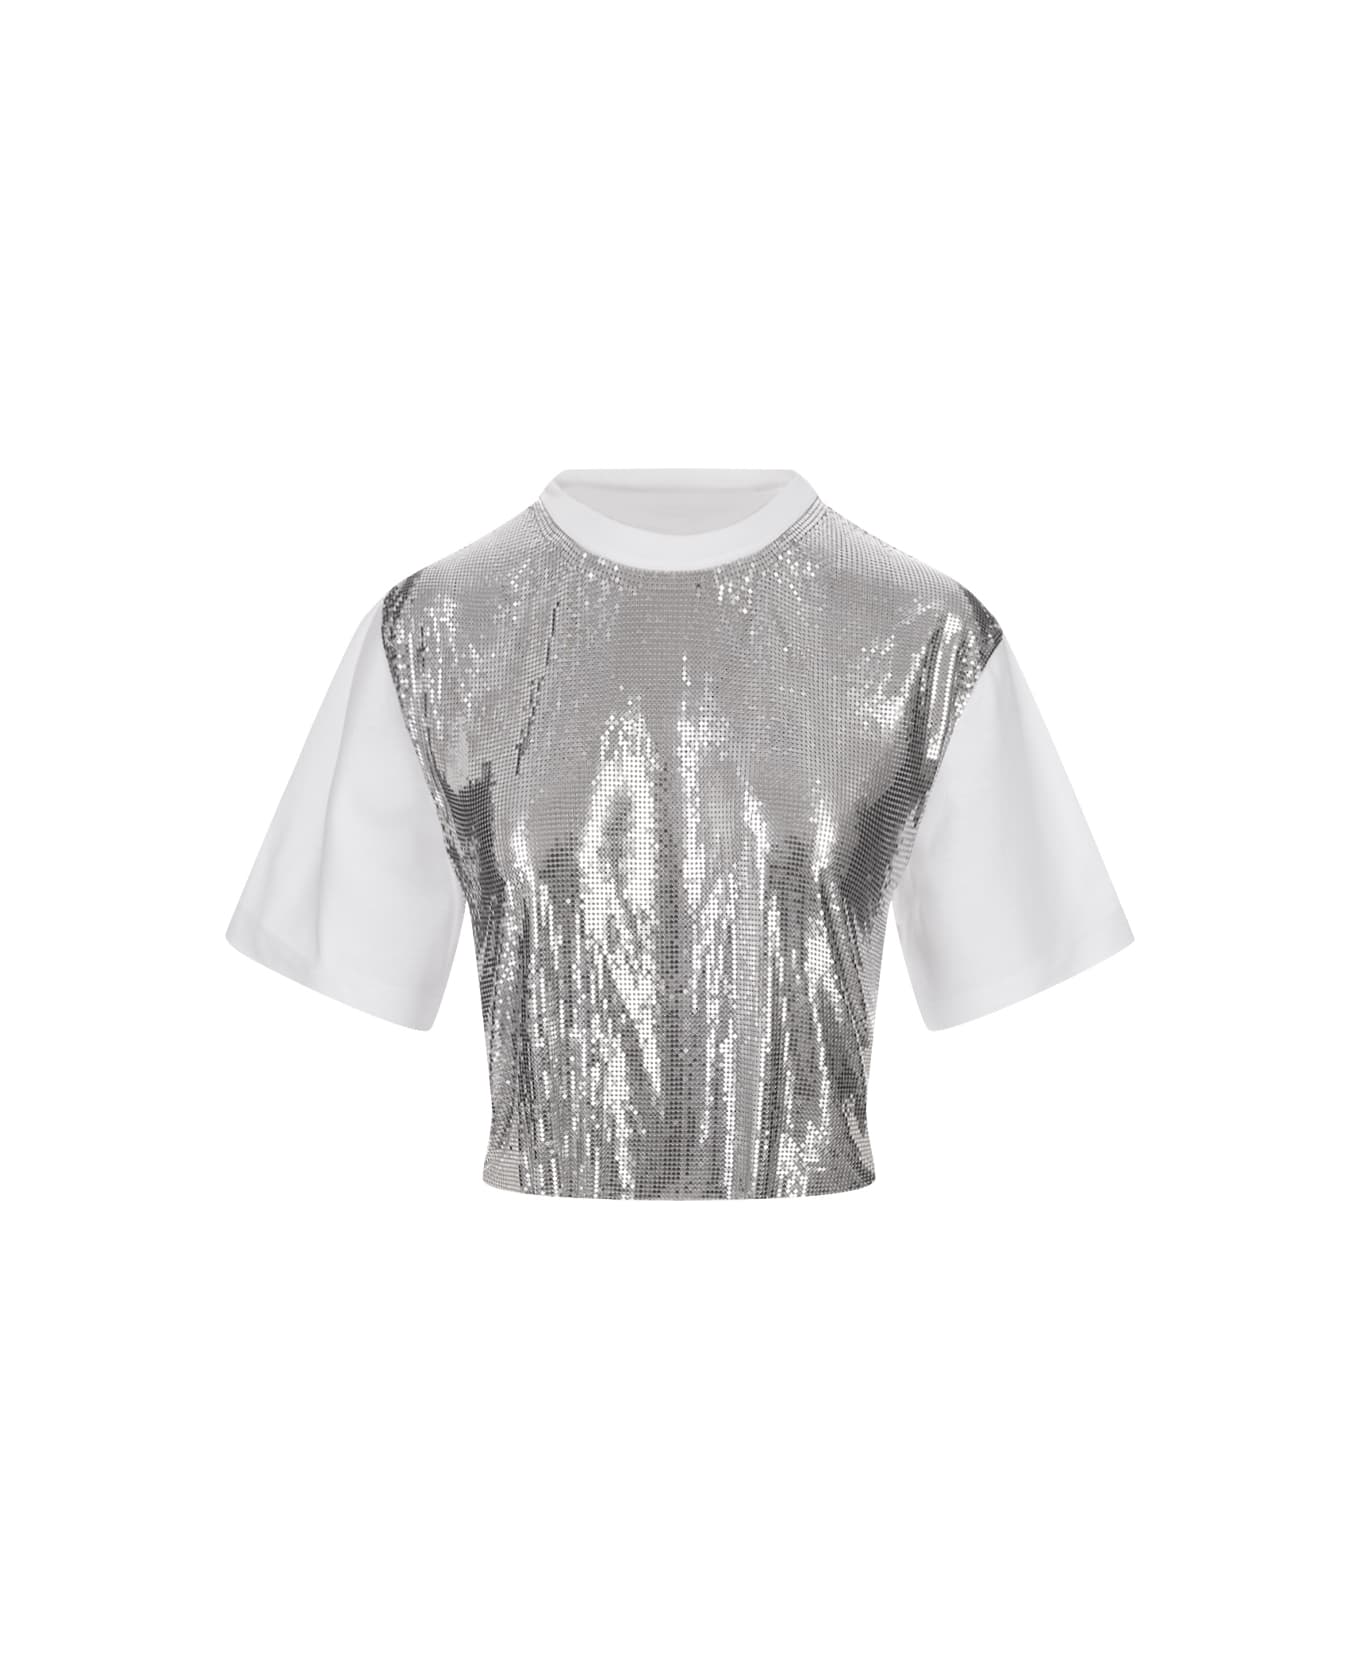 Paco Rabanne White Short T-shirt With Silver Mesh Panel - SILVER/WHITE